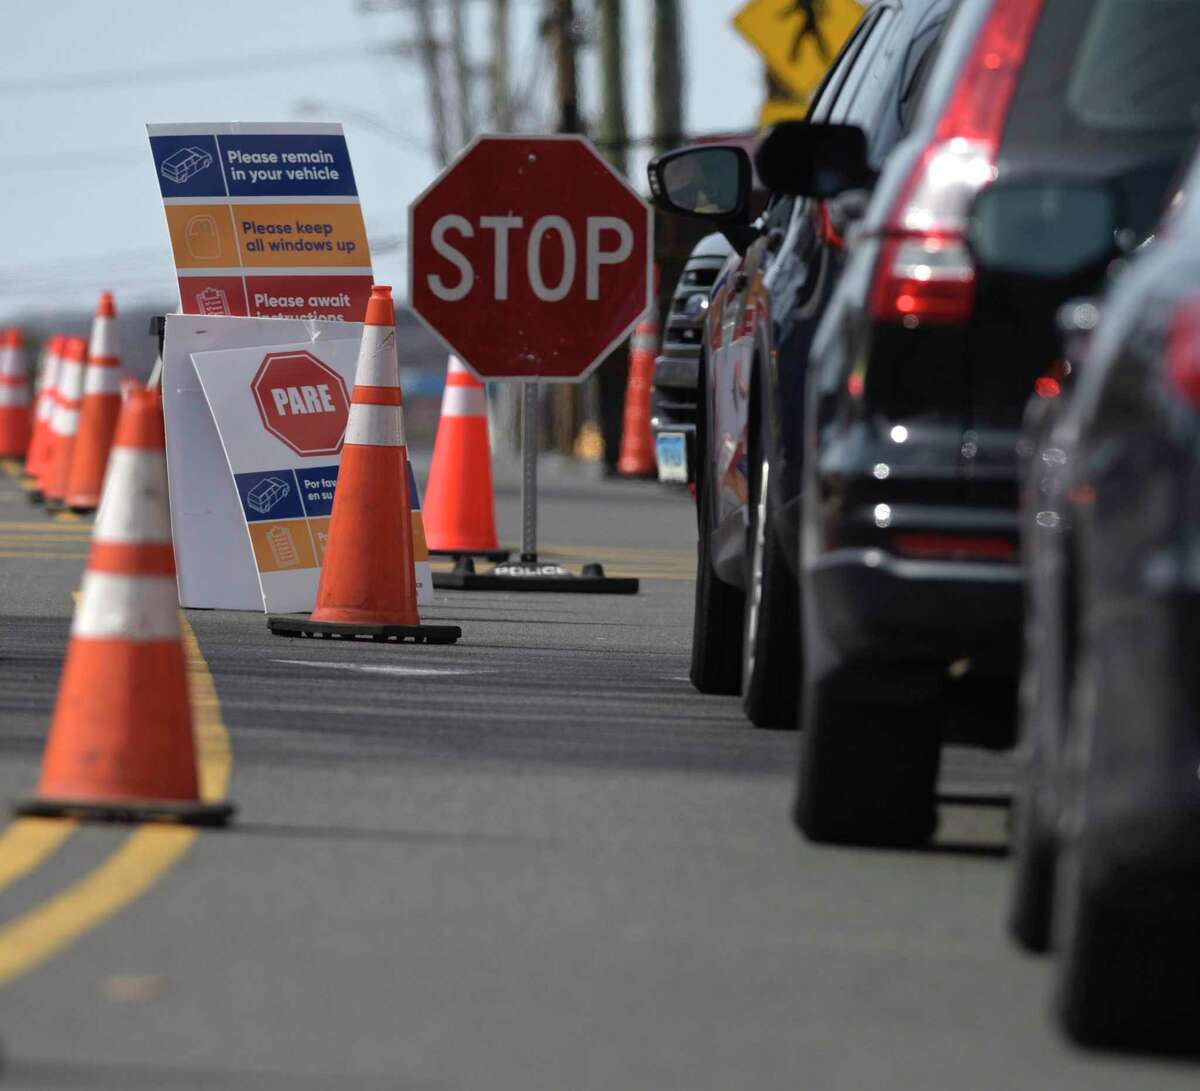 Cars wait in line at a drive-thru testing site for the respiratory virus known as COVID-19 that has been setup in one of Danbury Hospitals parking garages. The Danbury Police Department is controlling the flow of traffic to the street. Wednesday, March 18, 2020, in Danbury, Conn.